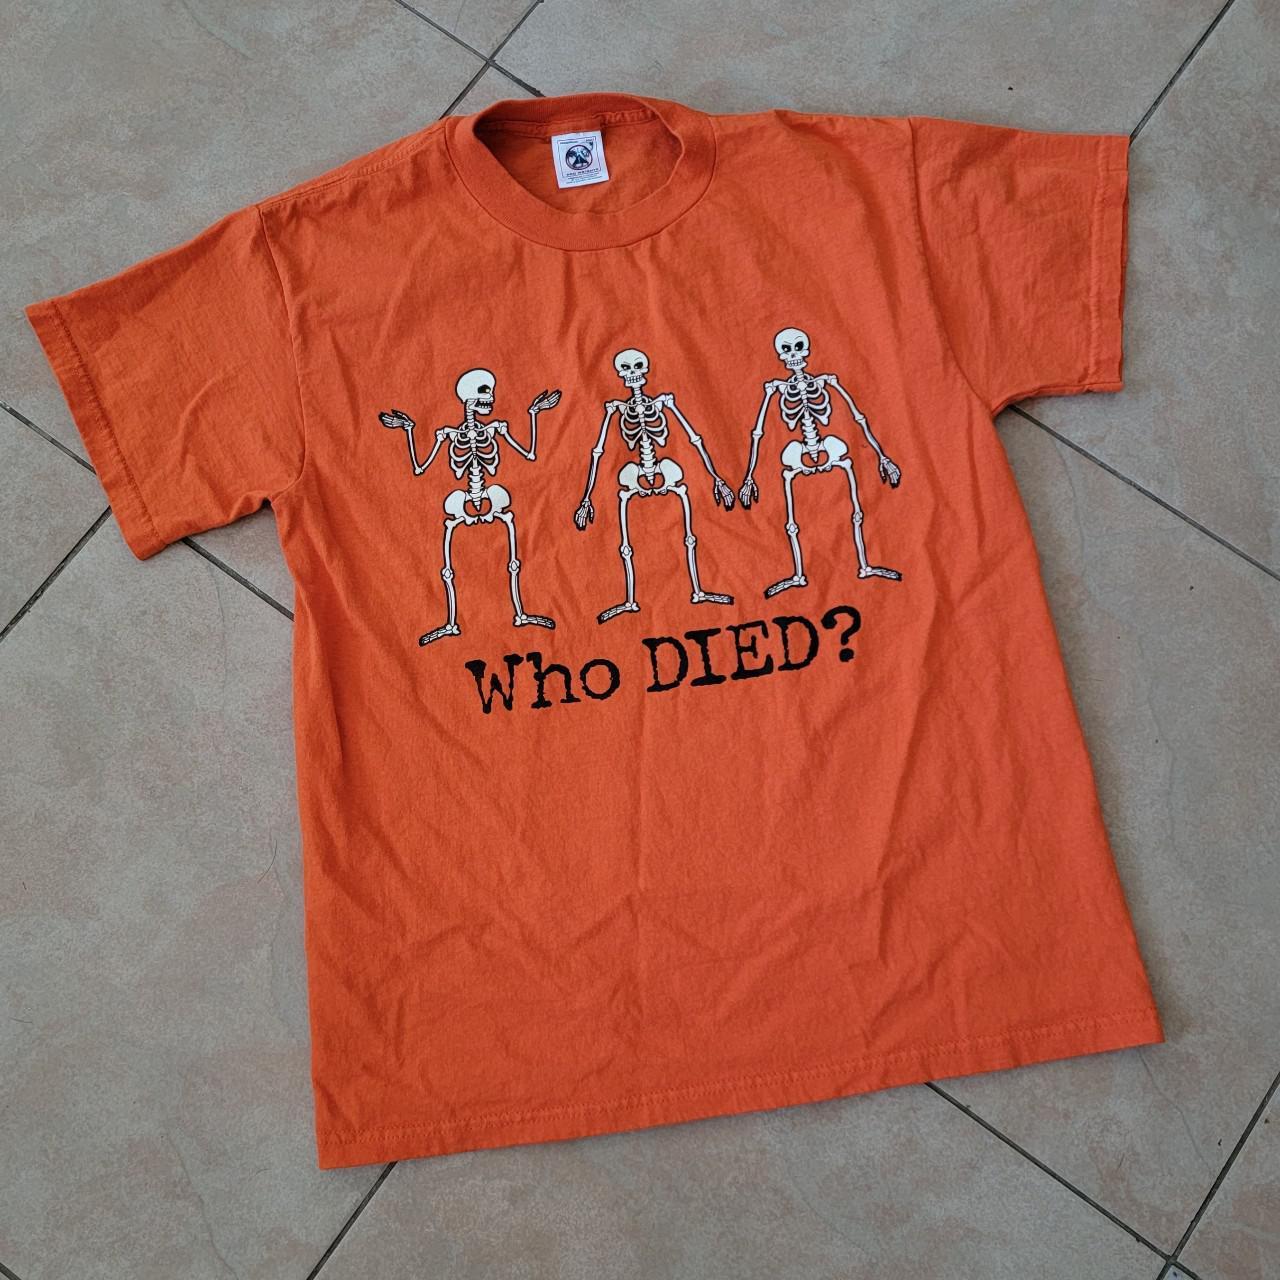 Product Image 1 - "Who Died?" Skeleton T-Shirt

Brand -